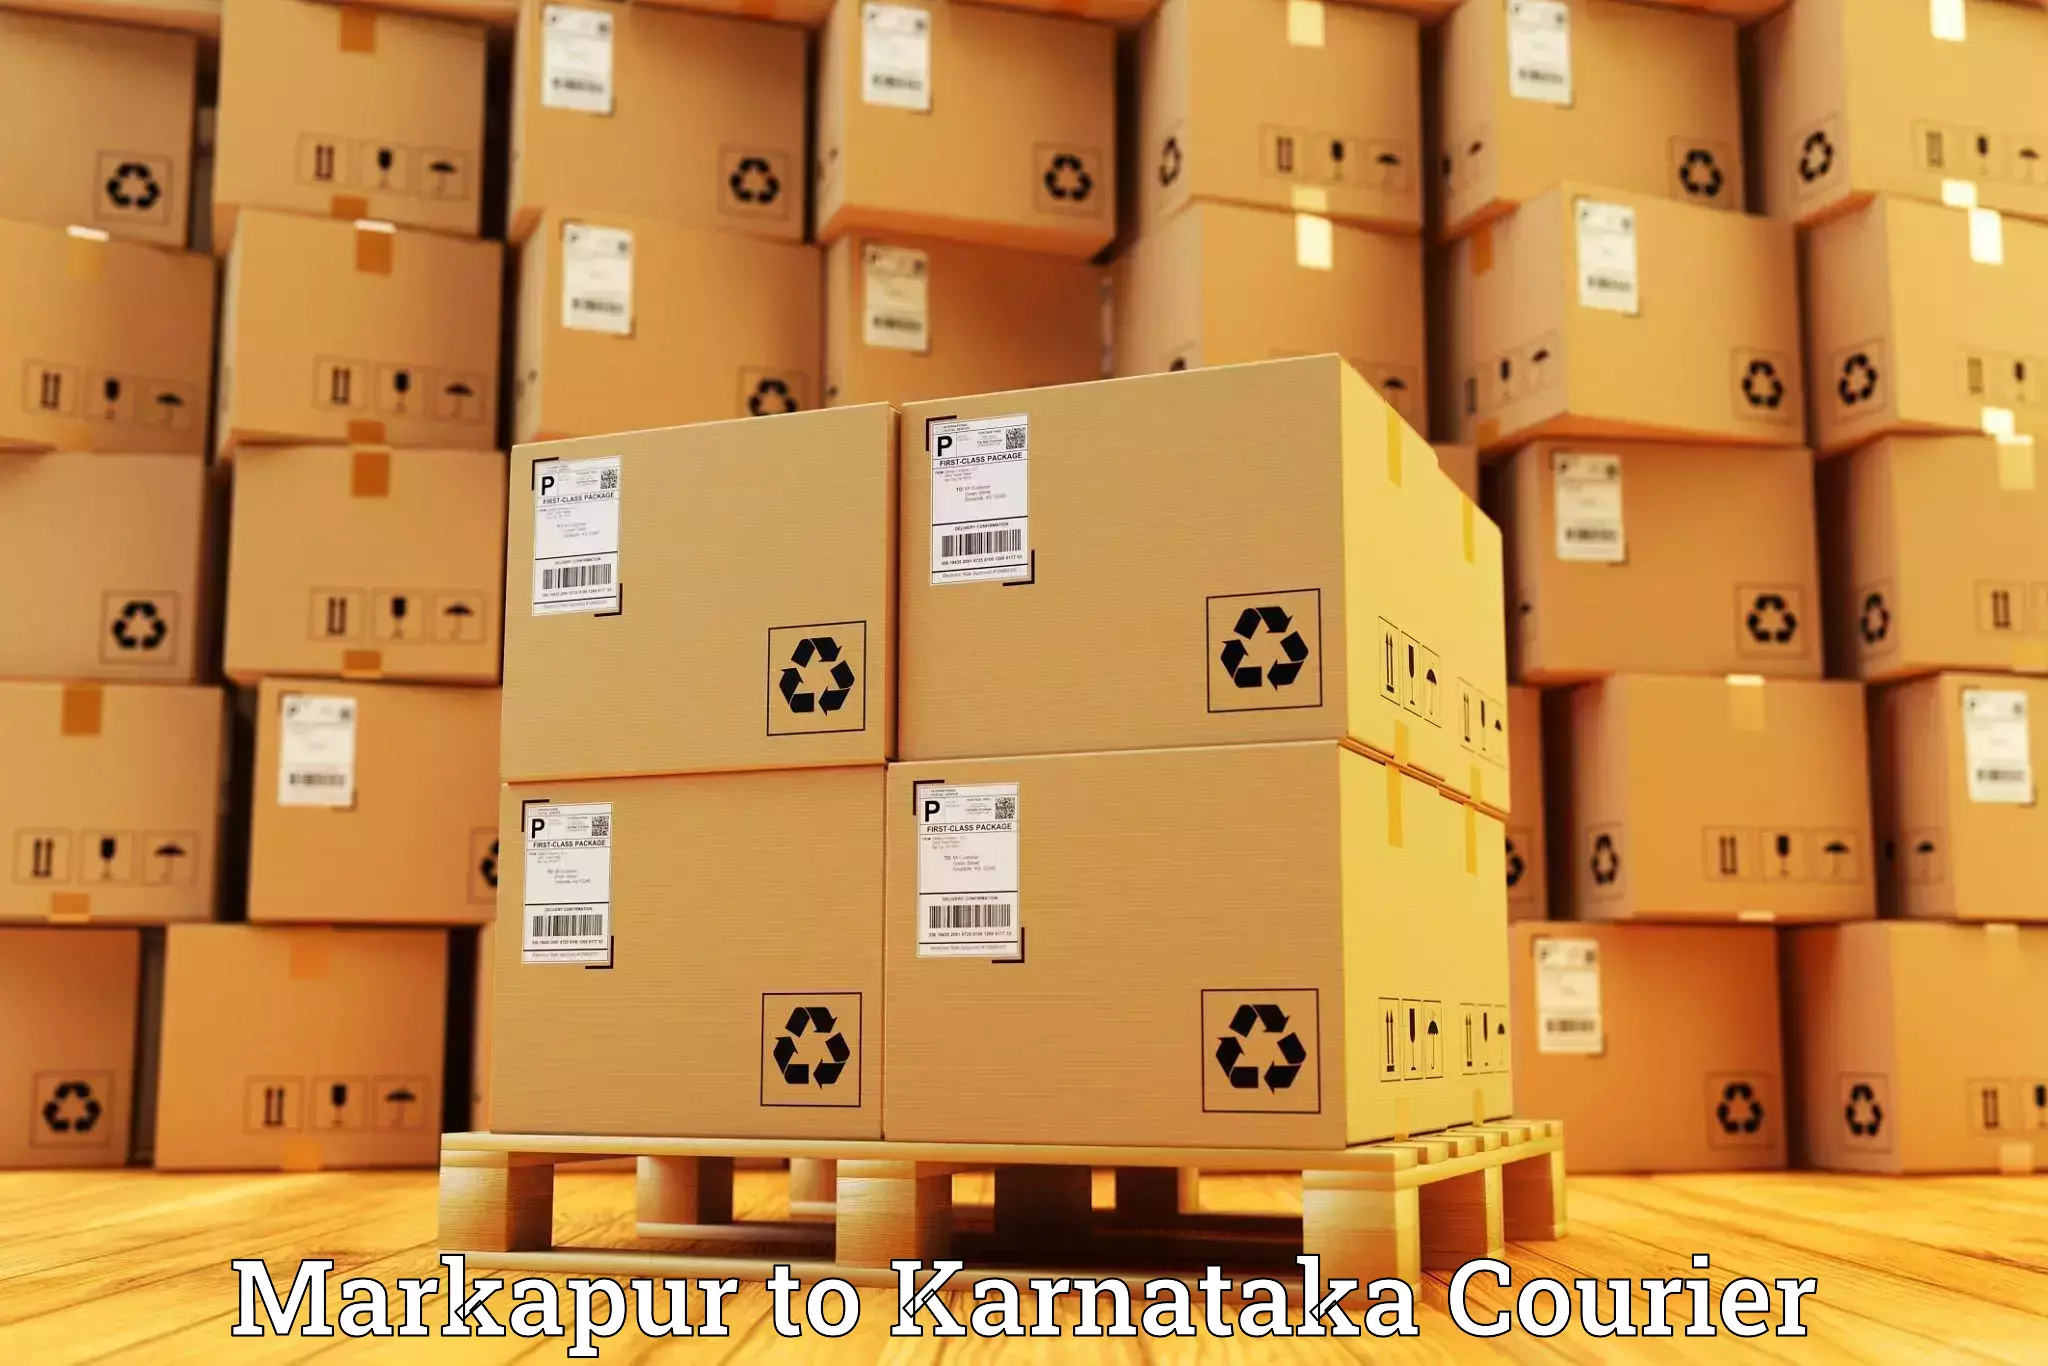 Next-day delivery options Markapur to Yadgiri